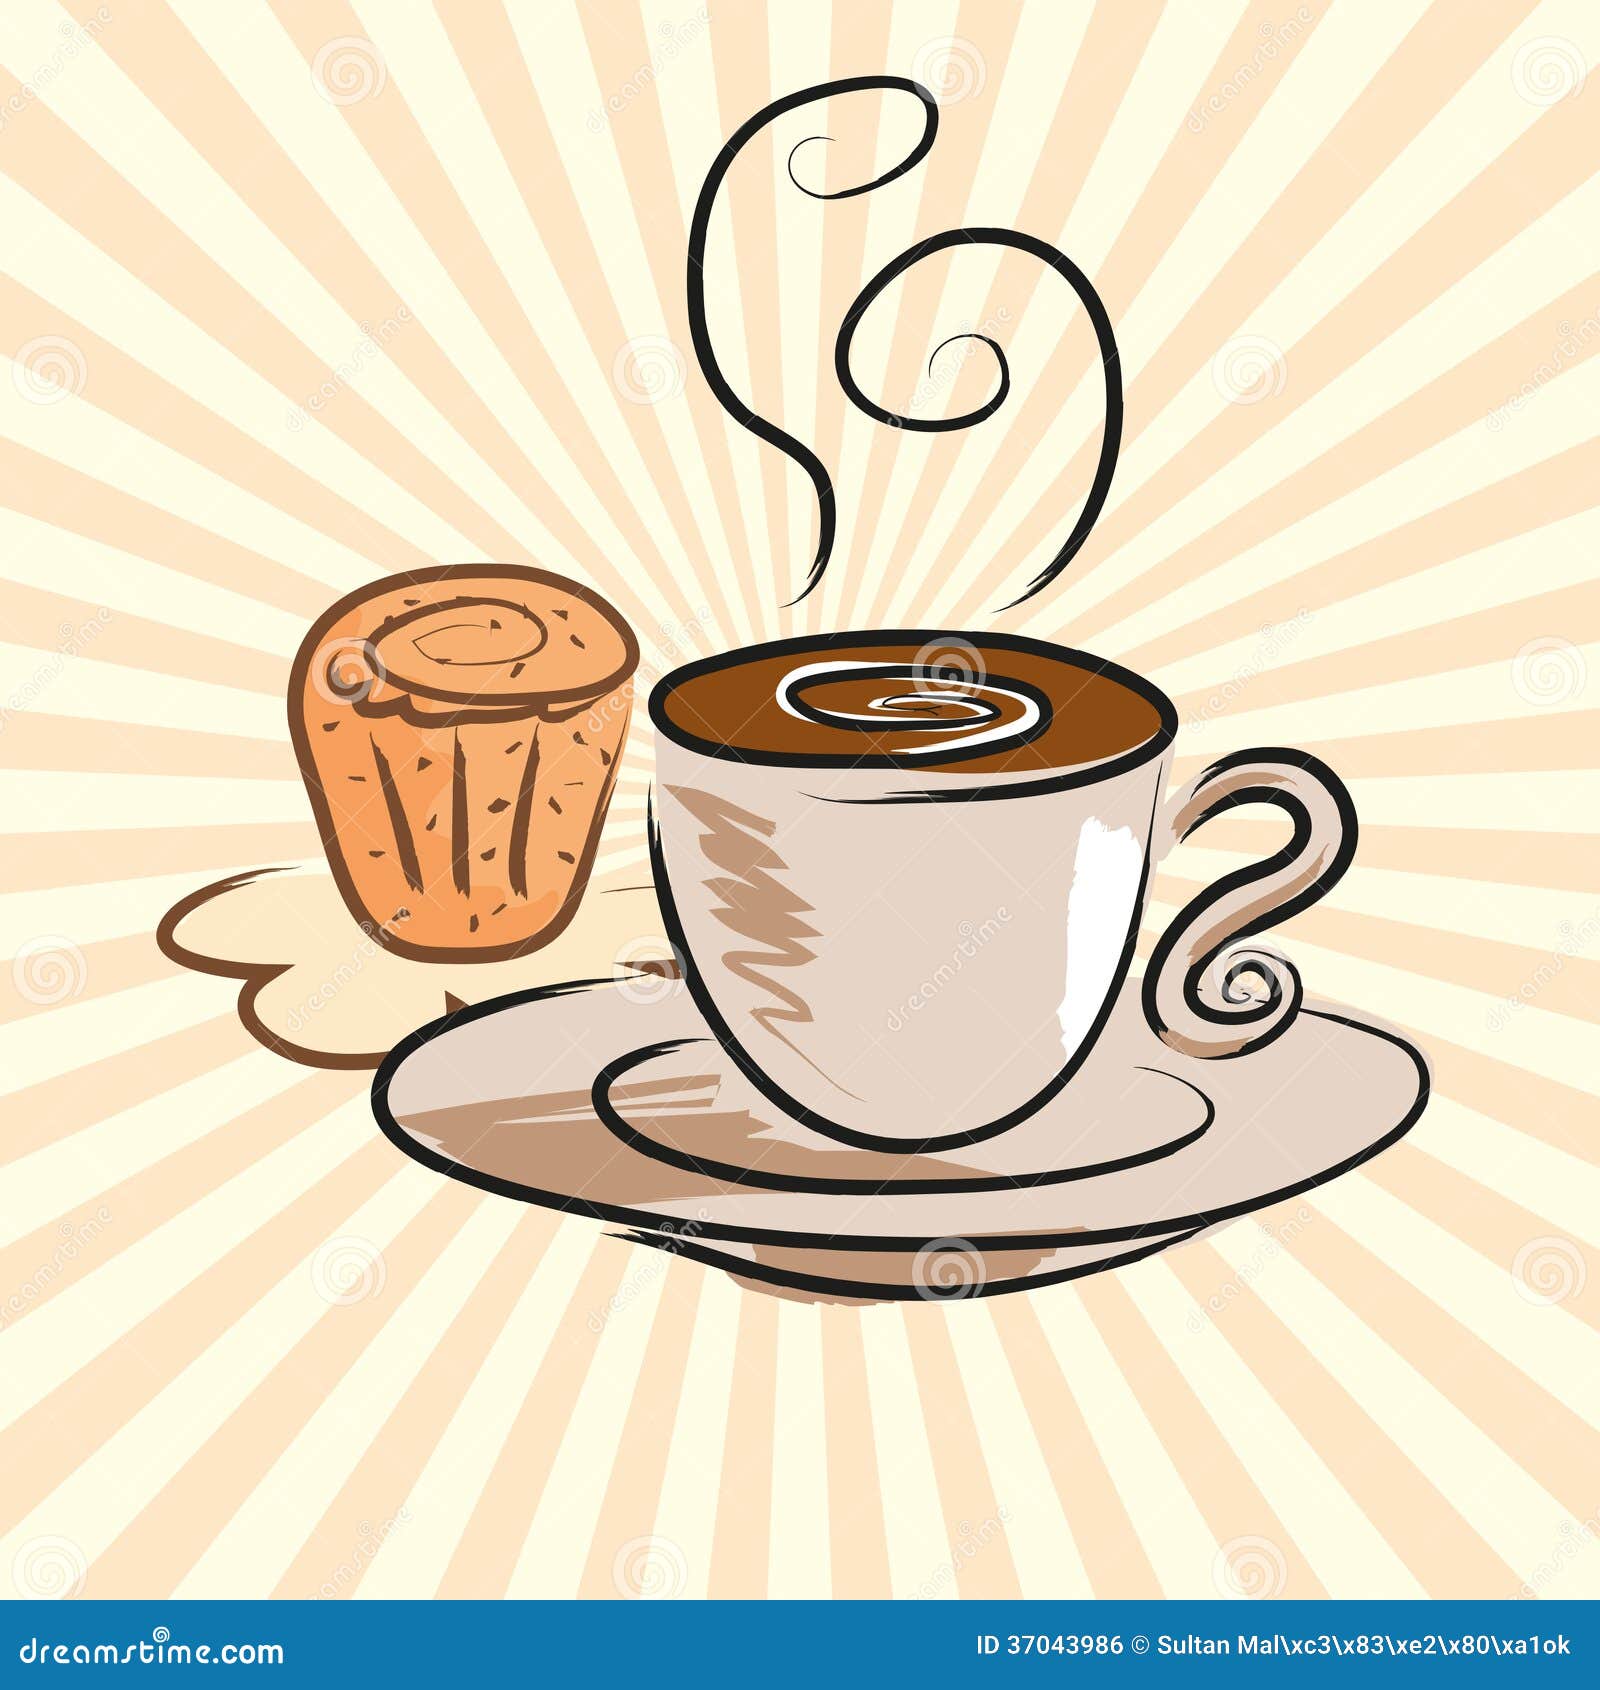 Coffee And Cake Royalty Free Stock Image - Image: 37043986